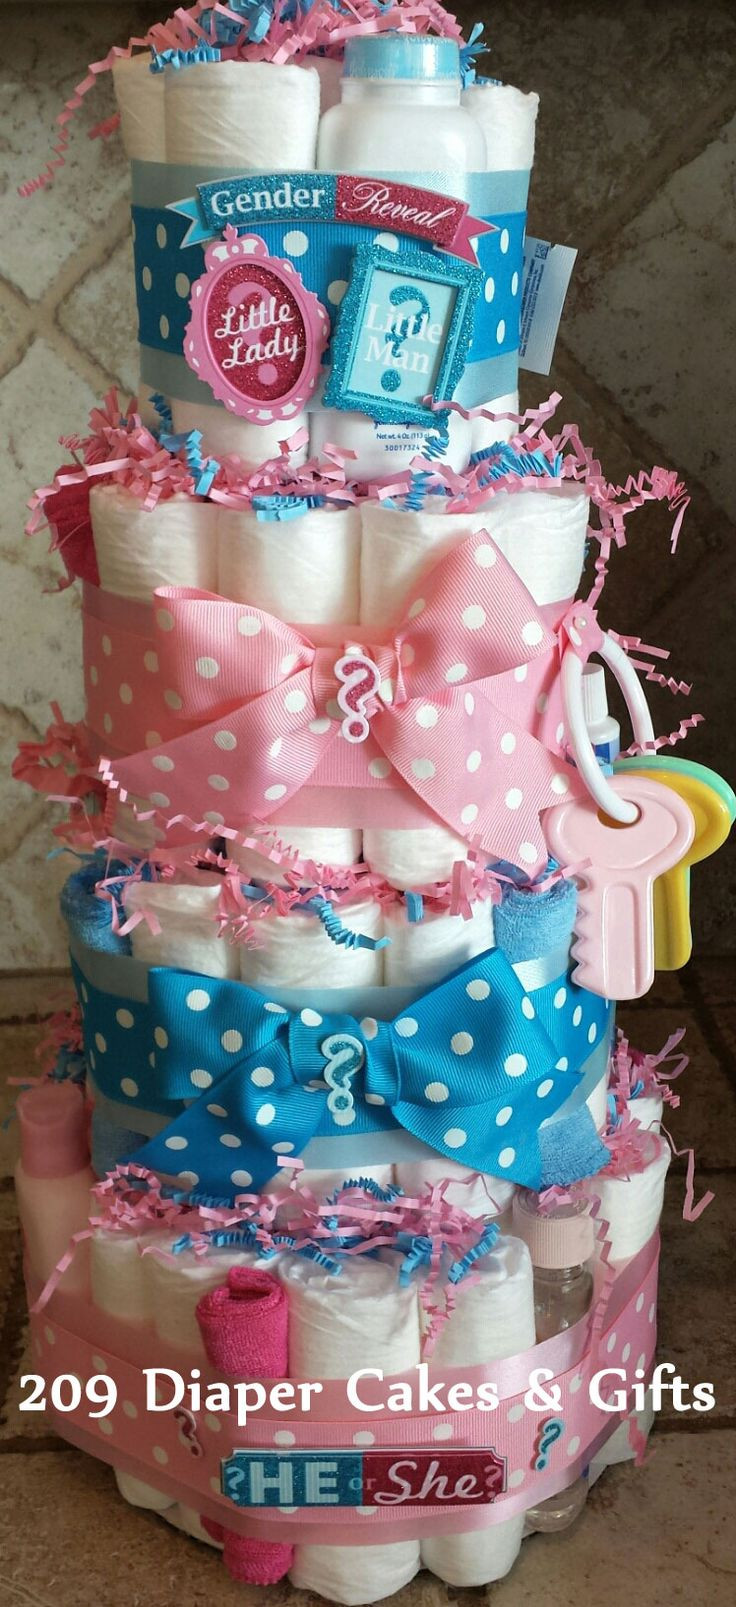 Gift Ideas For A Gender Reveal Party
 4 Tier Pink & Blue Gender Reveal Diaper Cake by 209 Diaper